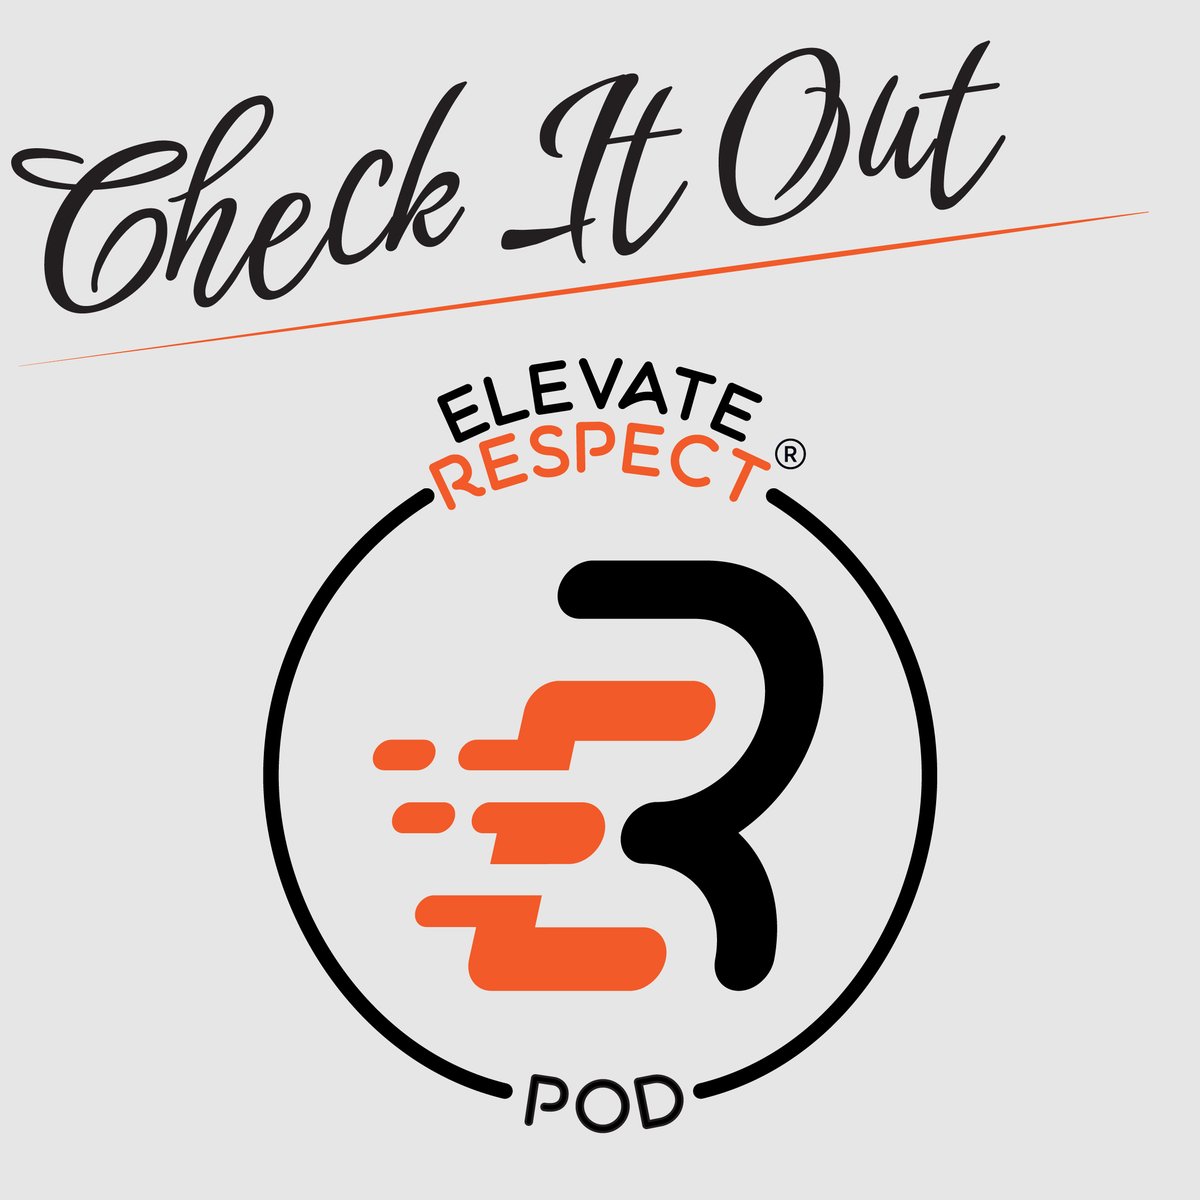 Did you know we have a podcast?? Well, we do! Learn more at officiallyhuman.com/elevate-respec….

#Podcast #ElevateRespect #Officials #SportsOfficials